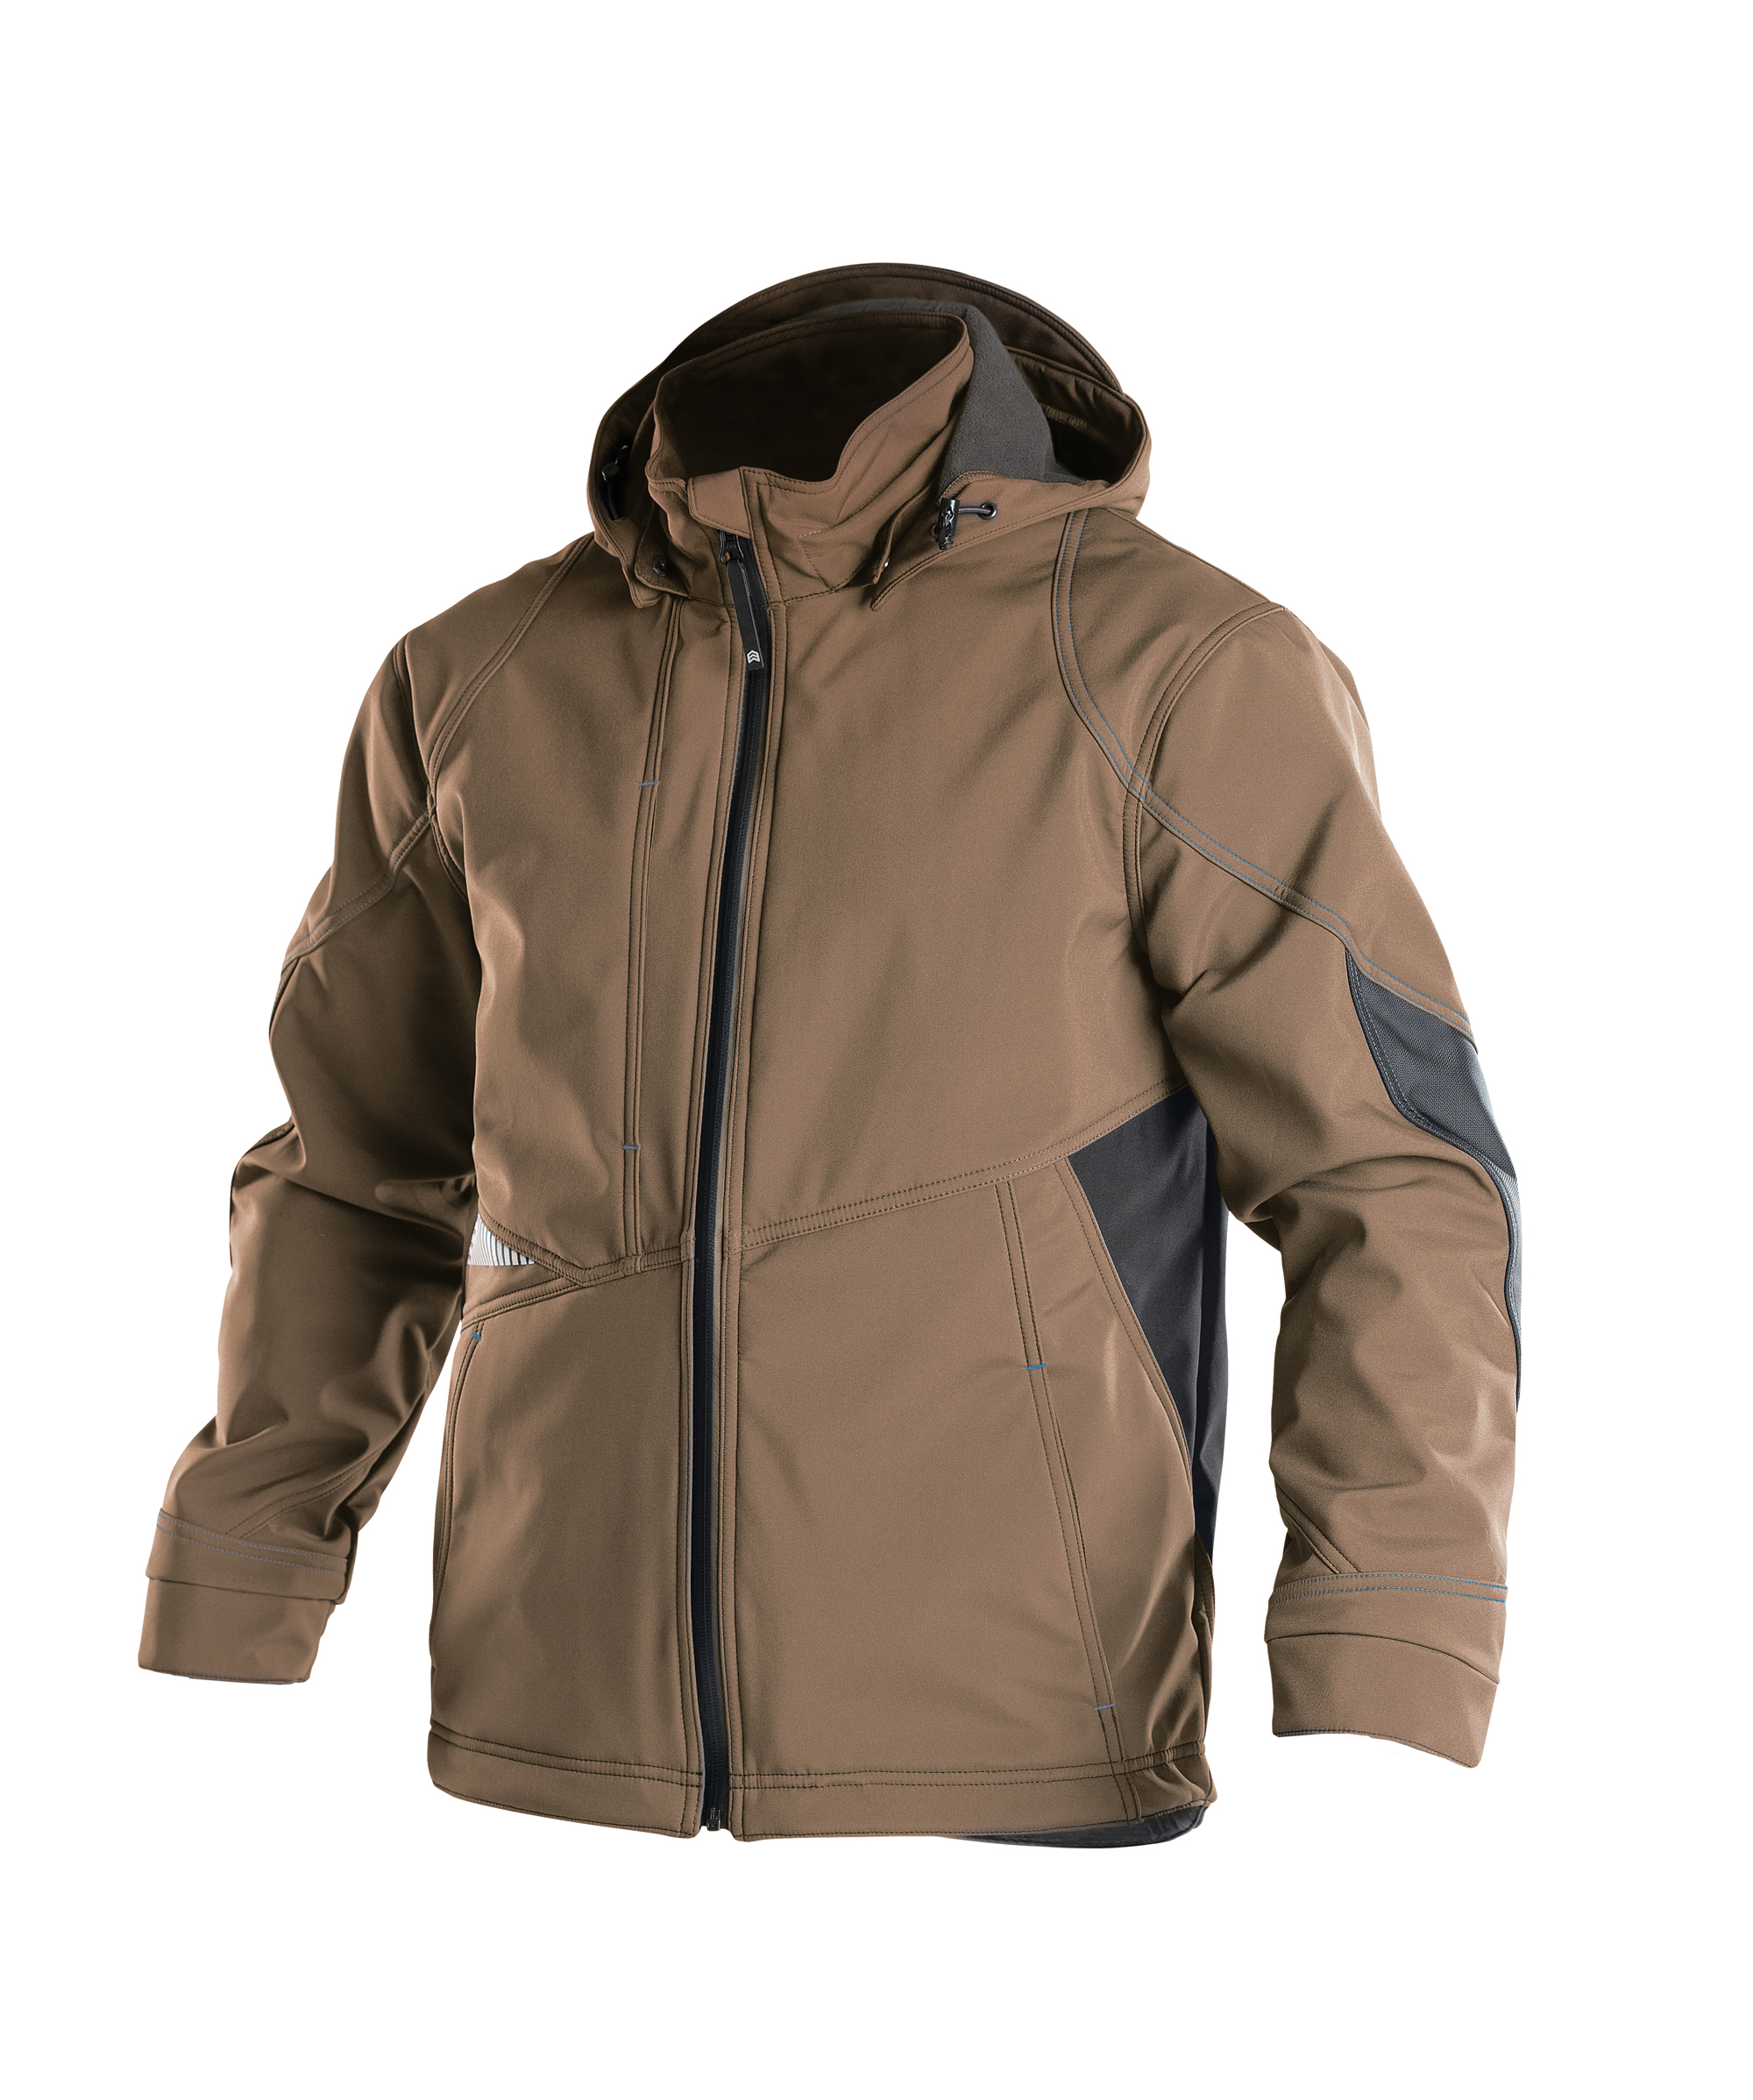 gravity_two-tone-softshell-jacket_clay-brown-anthracite-grey_front.jpg